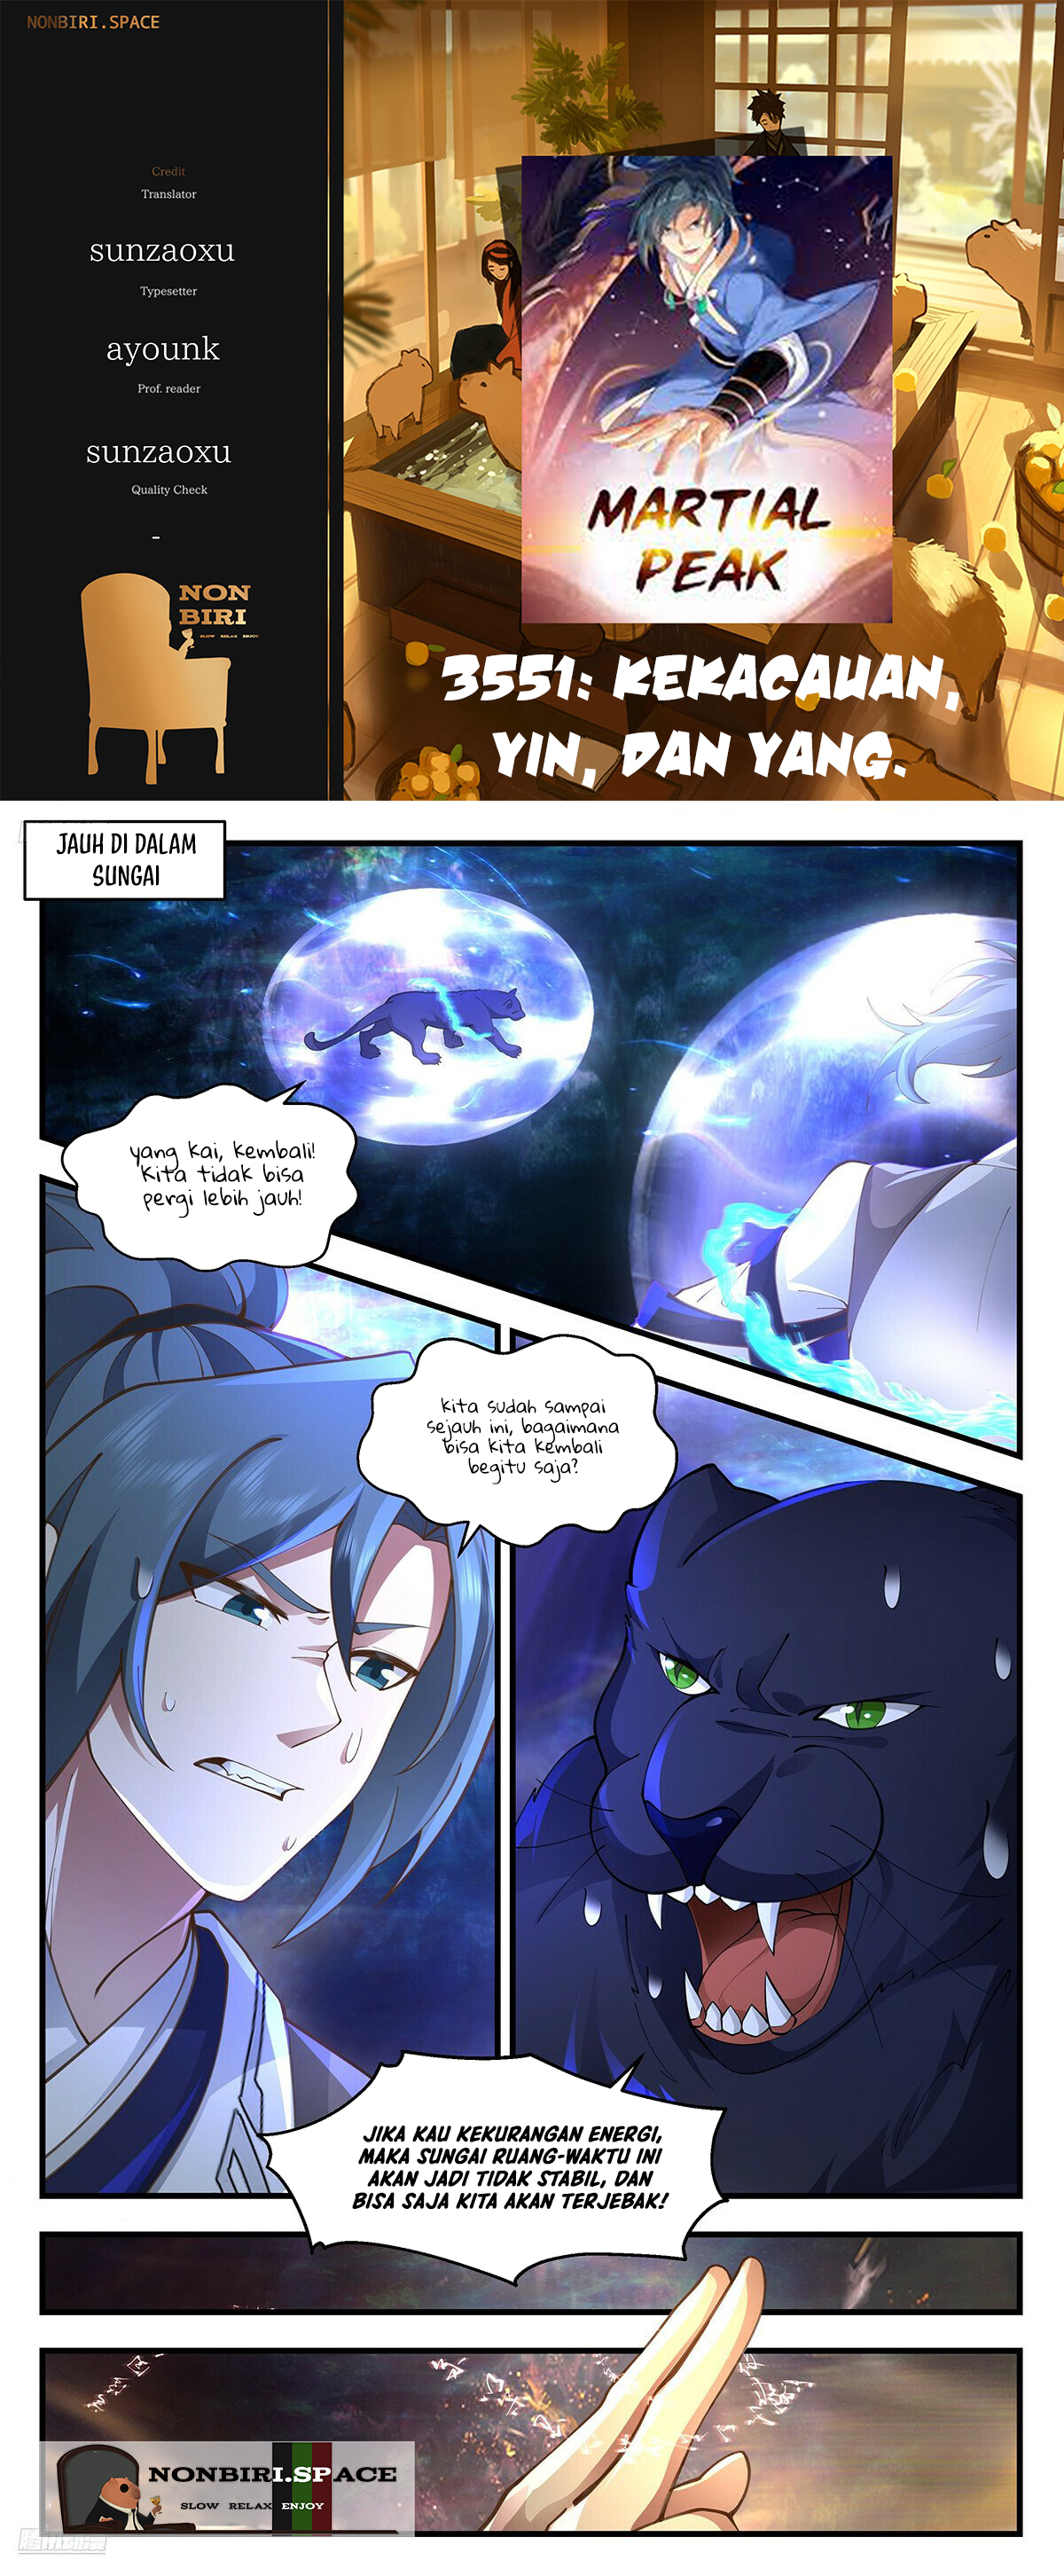 Martial Peak: Chapter 3551 - Page 1